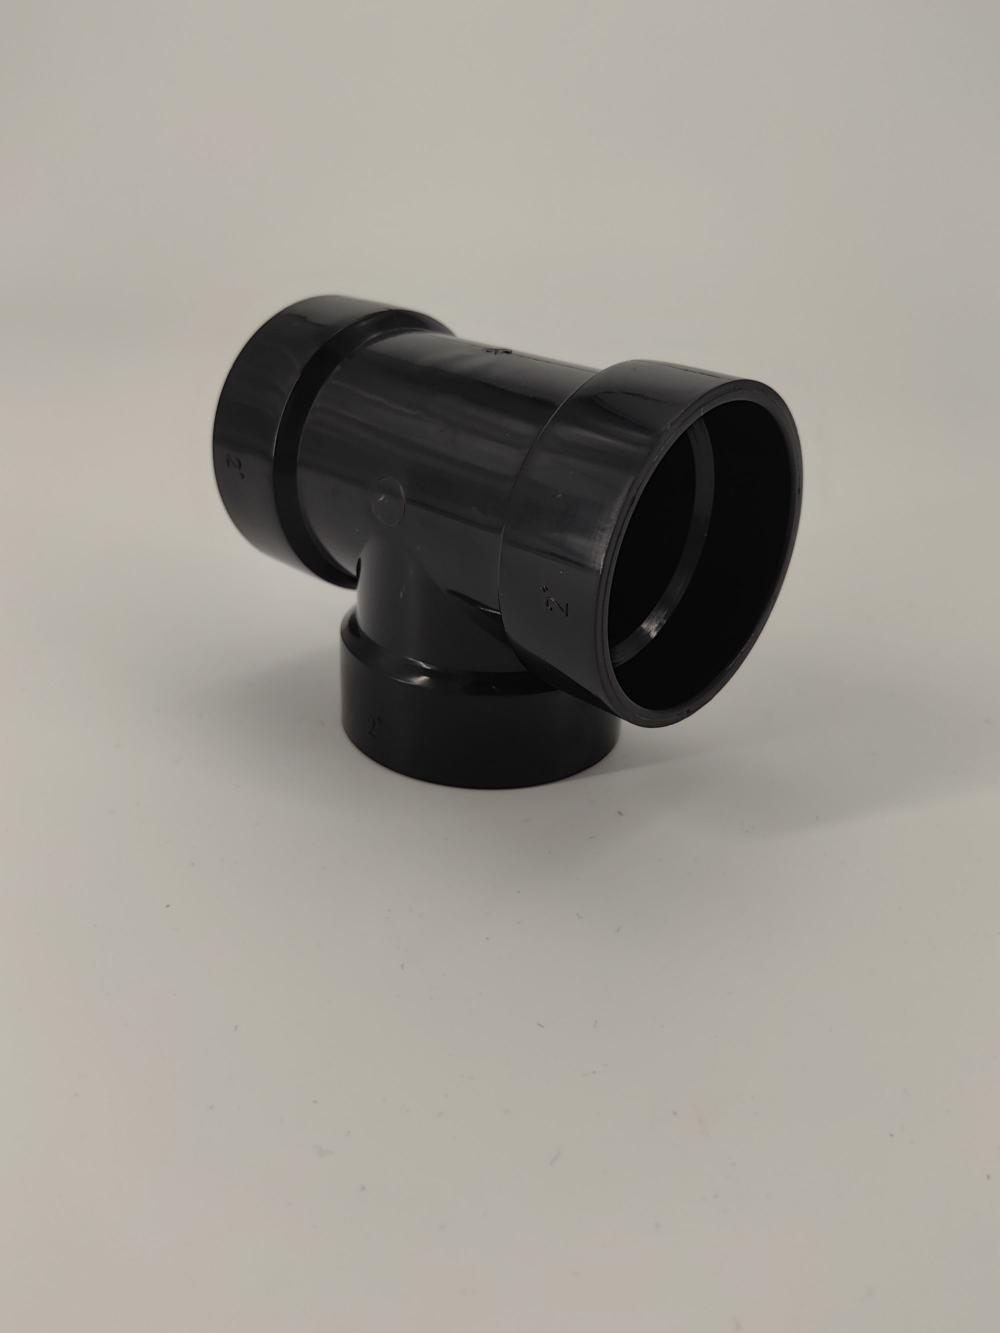 ABS pipe fittings 2 inch VENT TEE